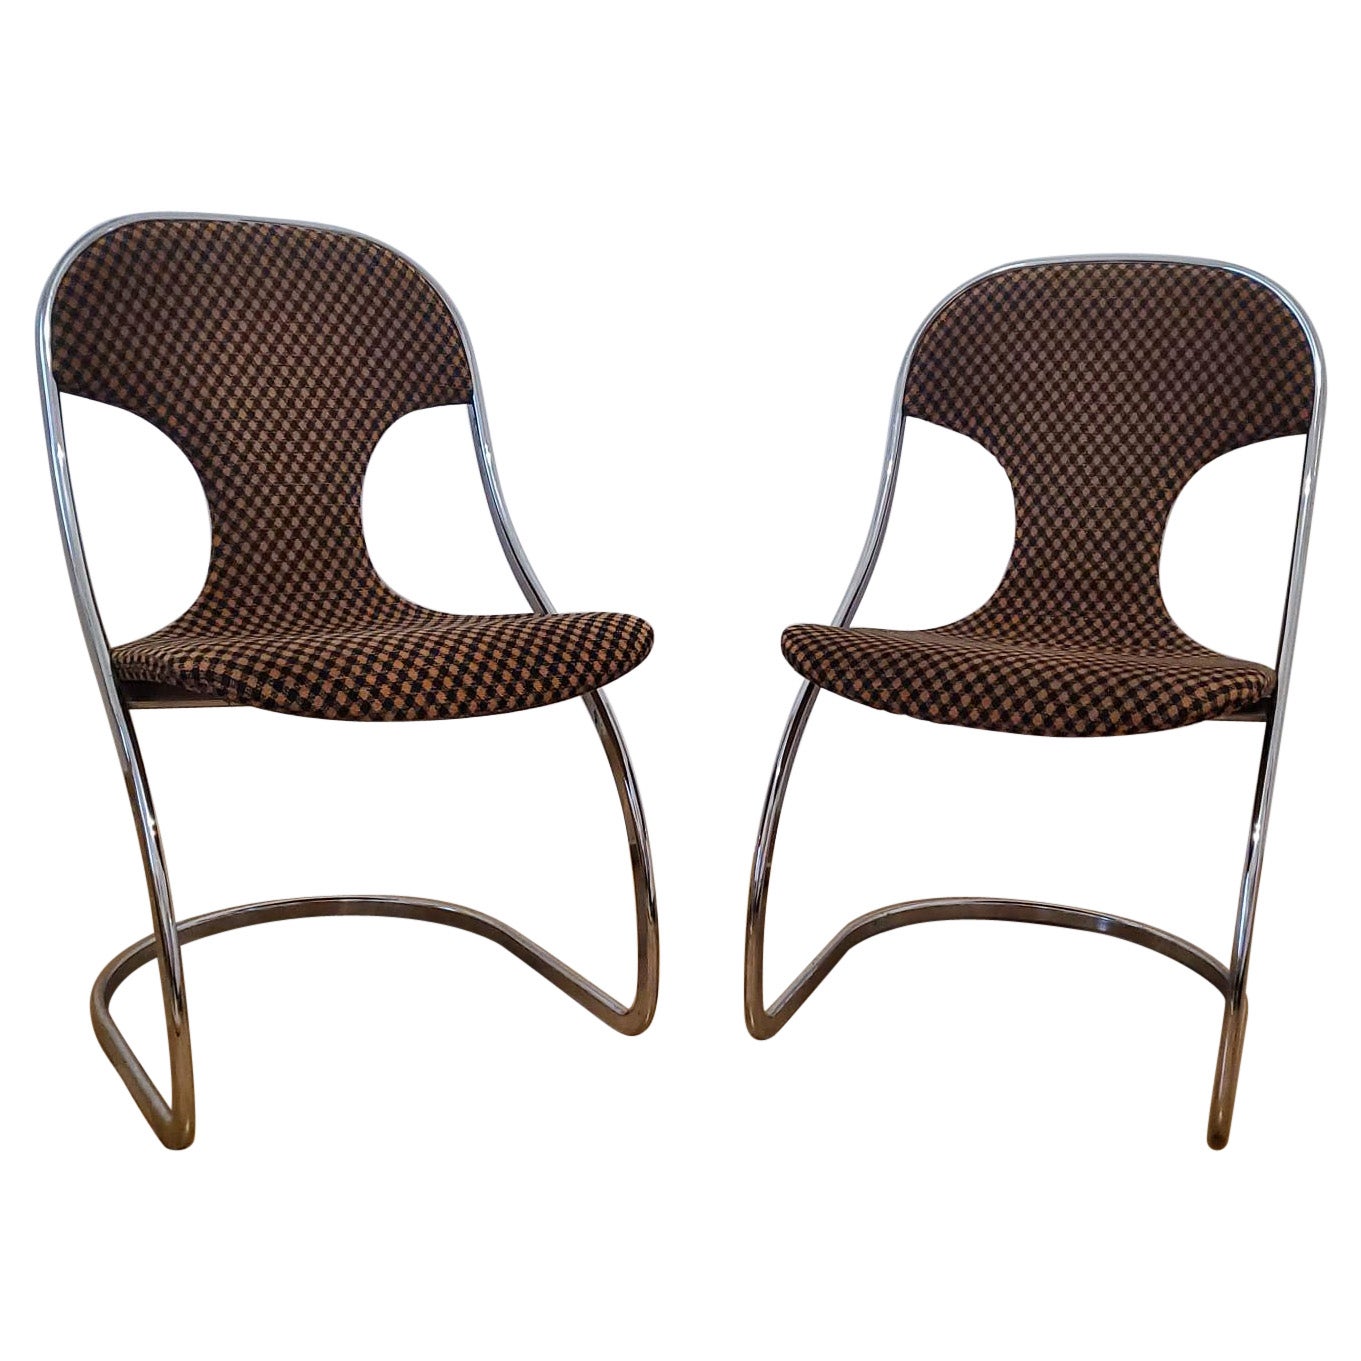 Pair of Midcentury Rare Design Chairs, Italy, 1970s For Sale